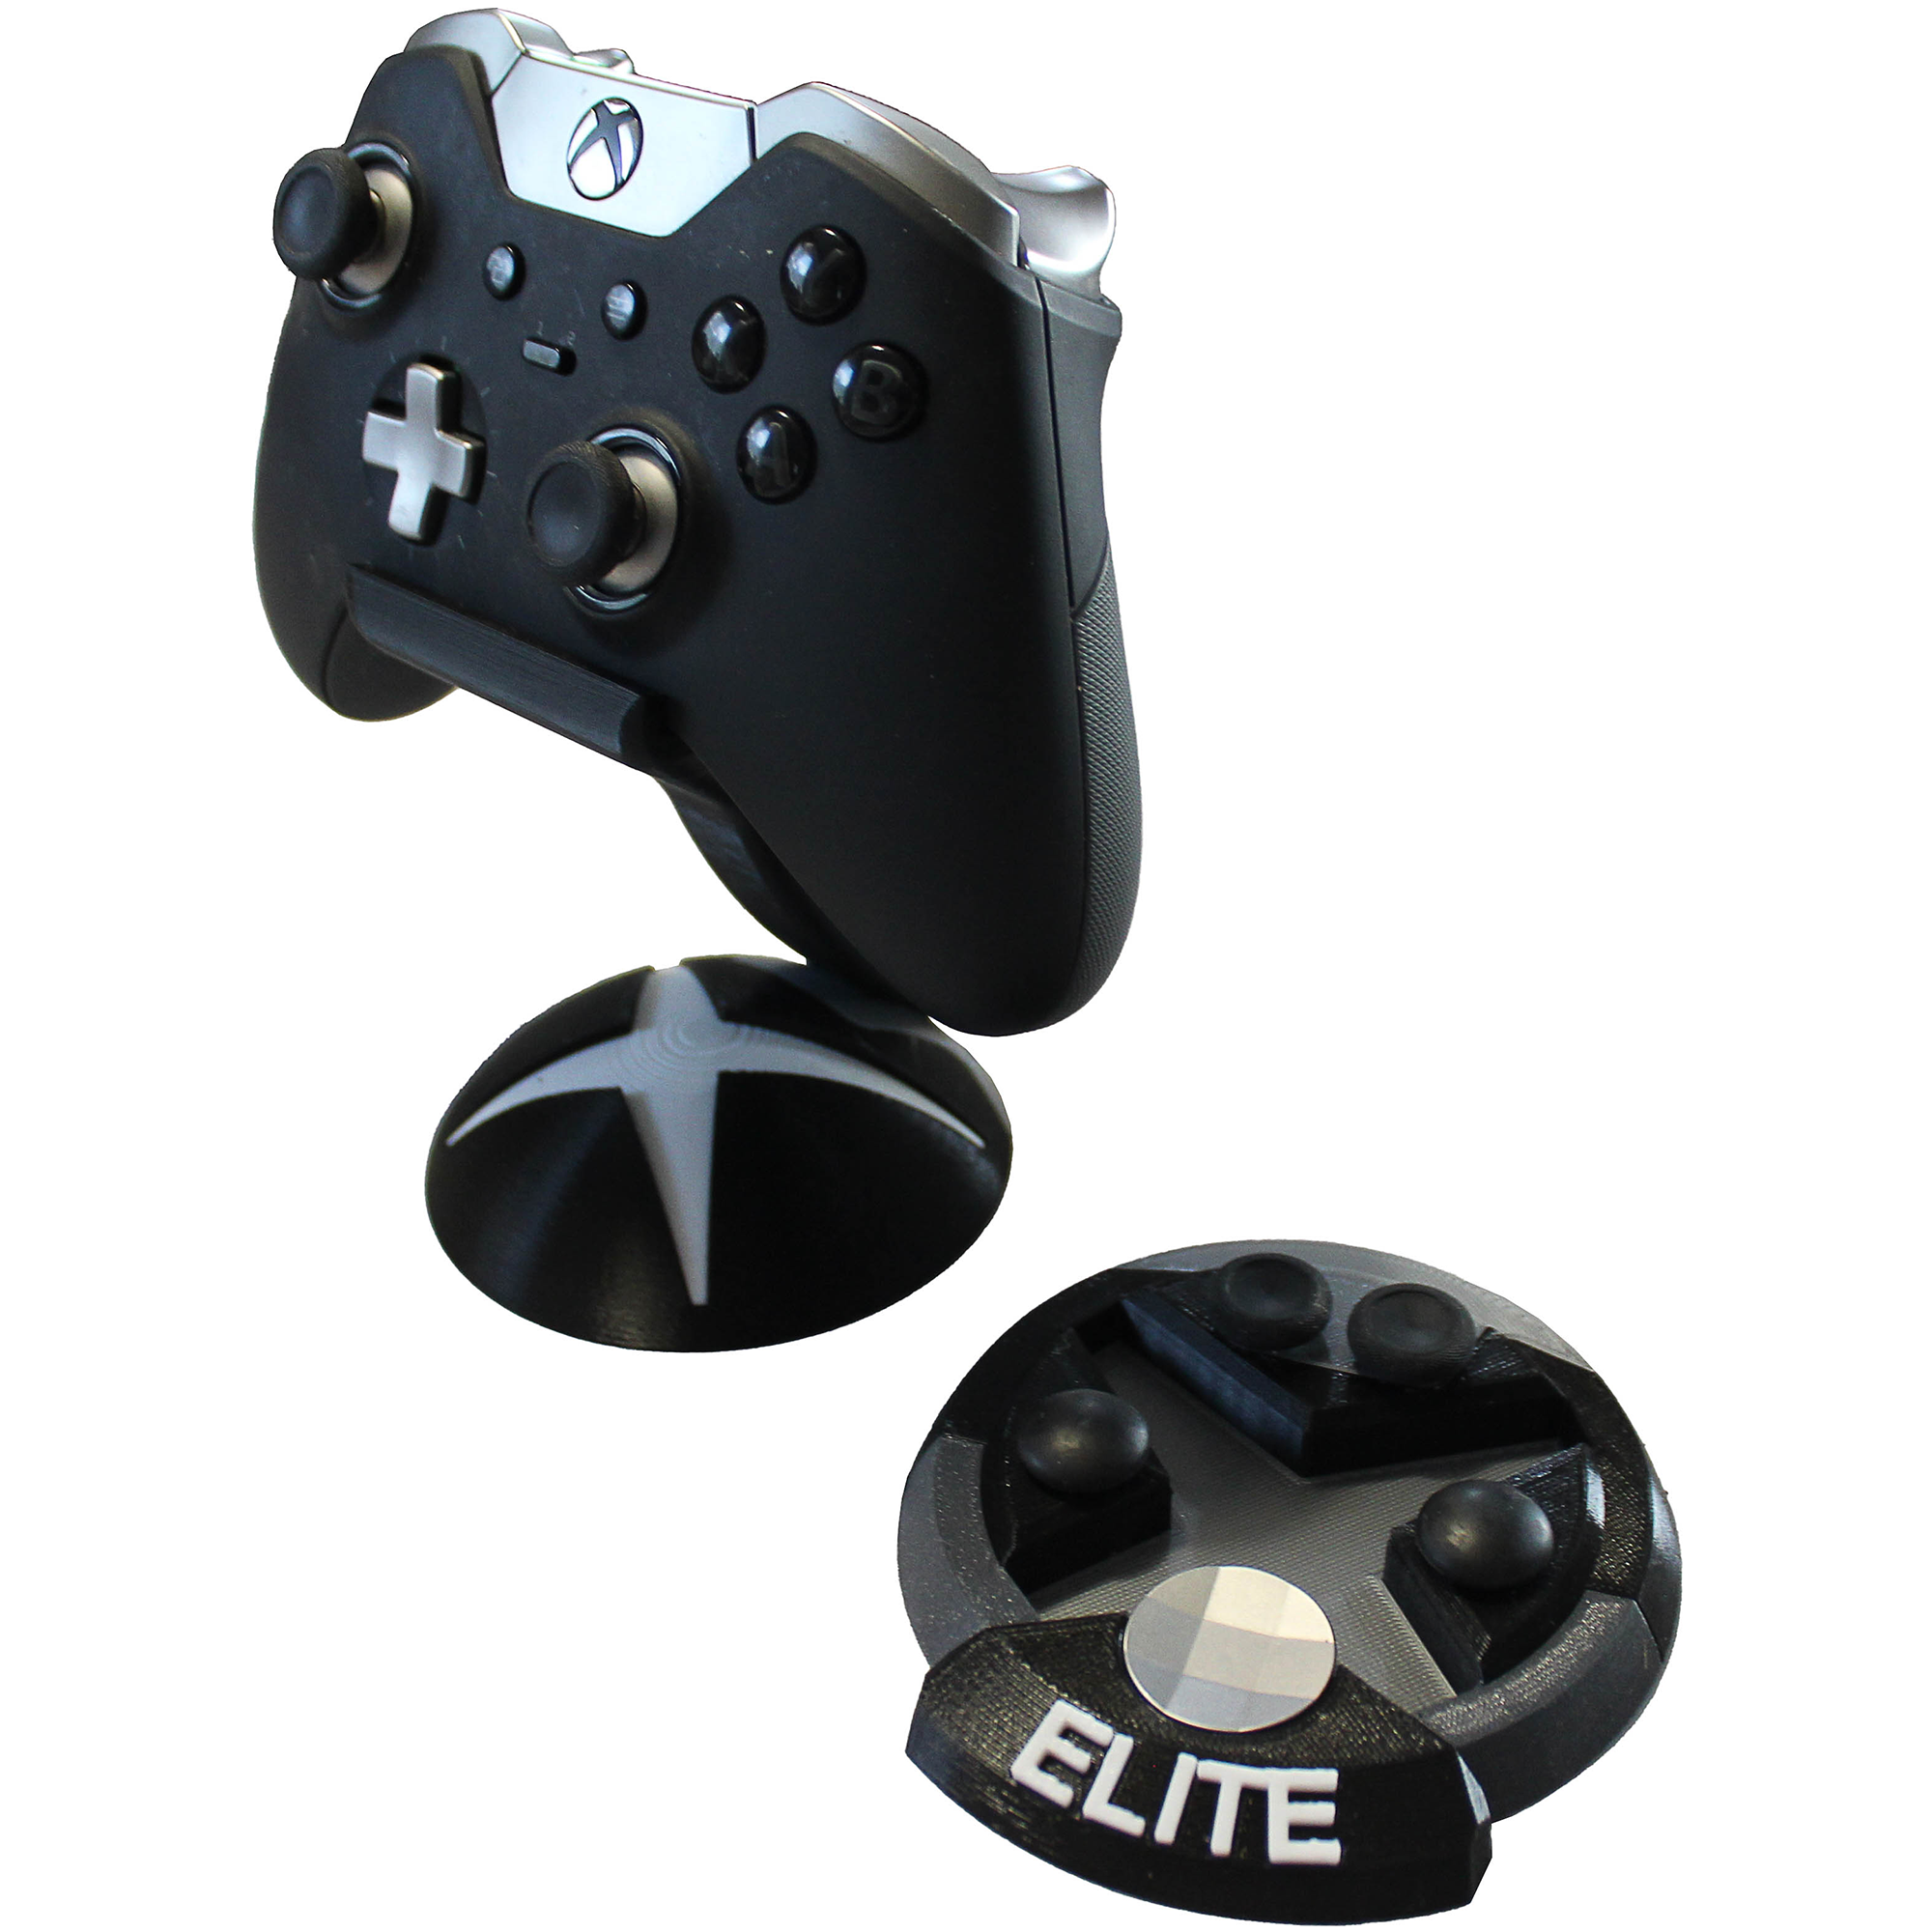 Support Manette Xbox 360 – legaming88